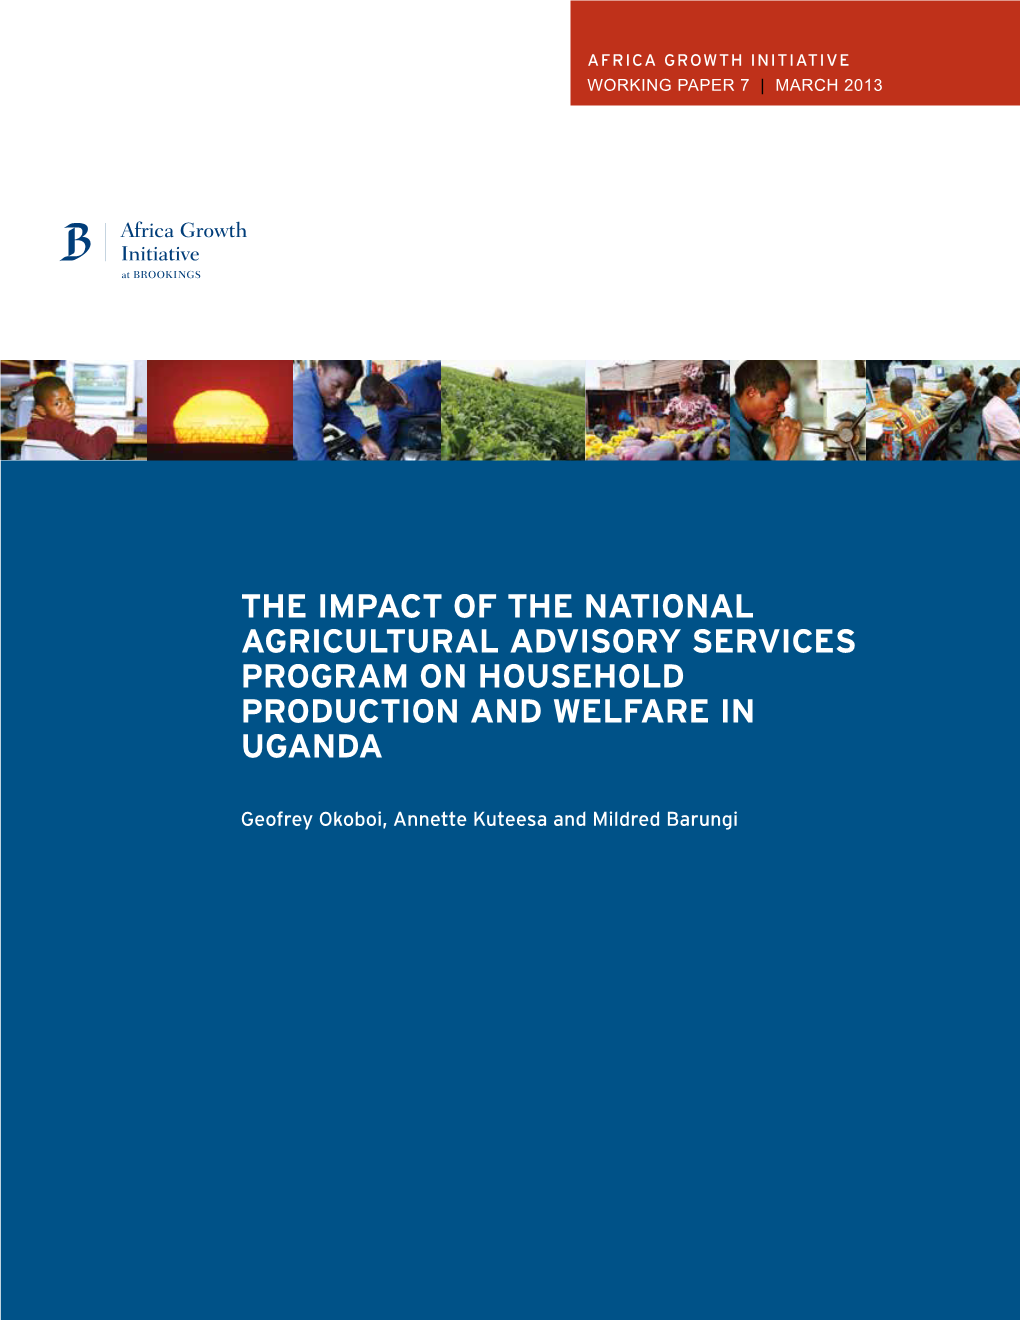 The Impact of the National Agricultural Advisory Services Program on Household Production and Welfare in Uganda